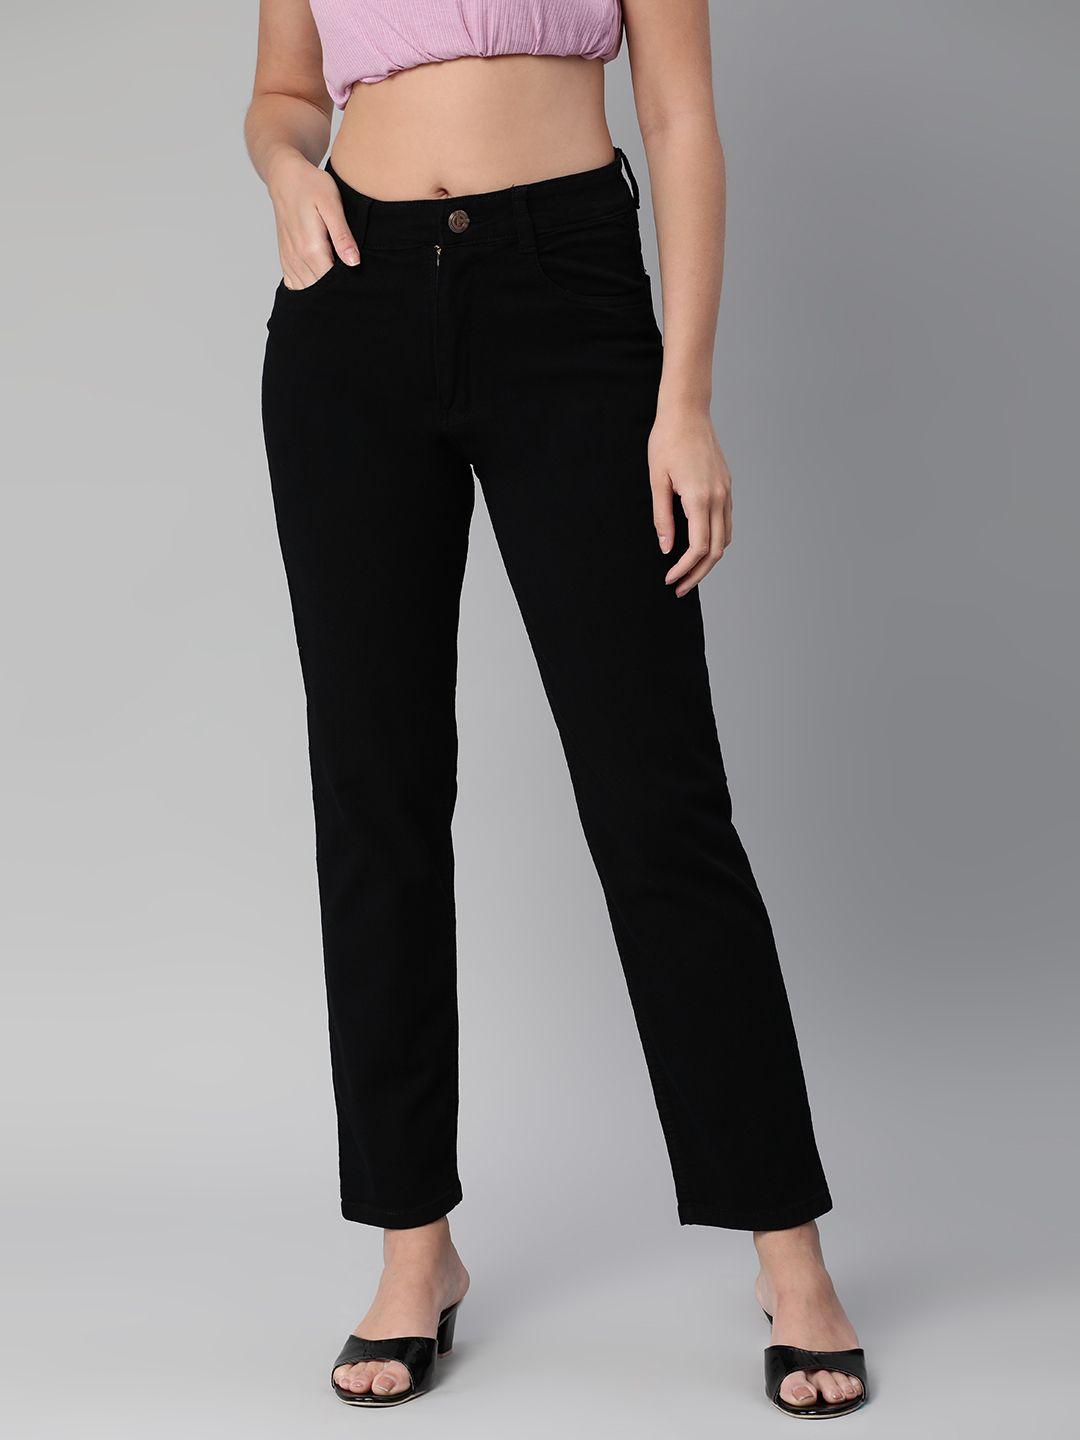 adbucks-straight-fit-high-rise-stretchable-jeans